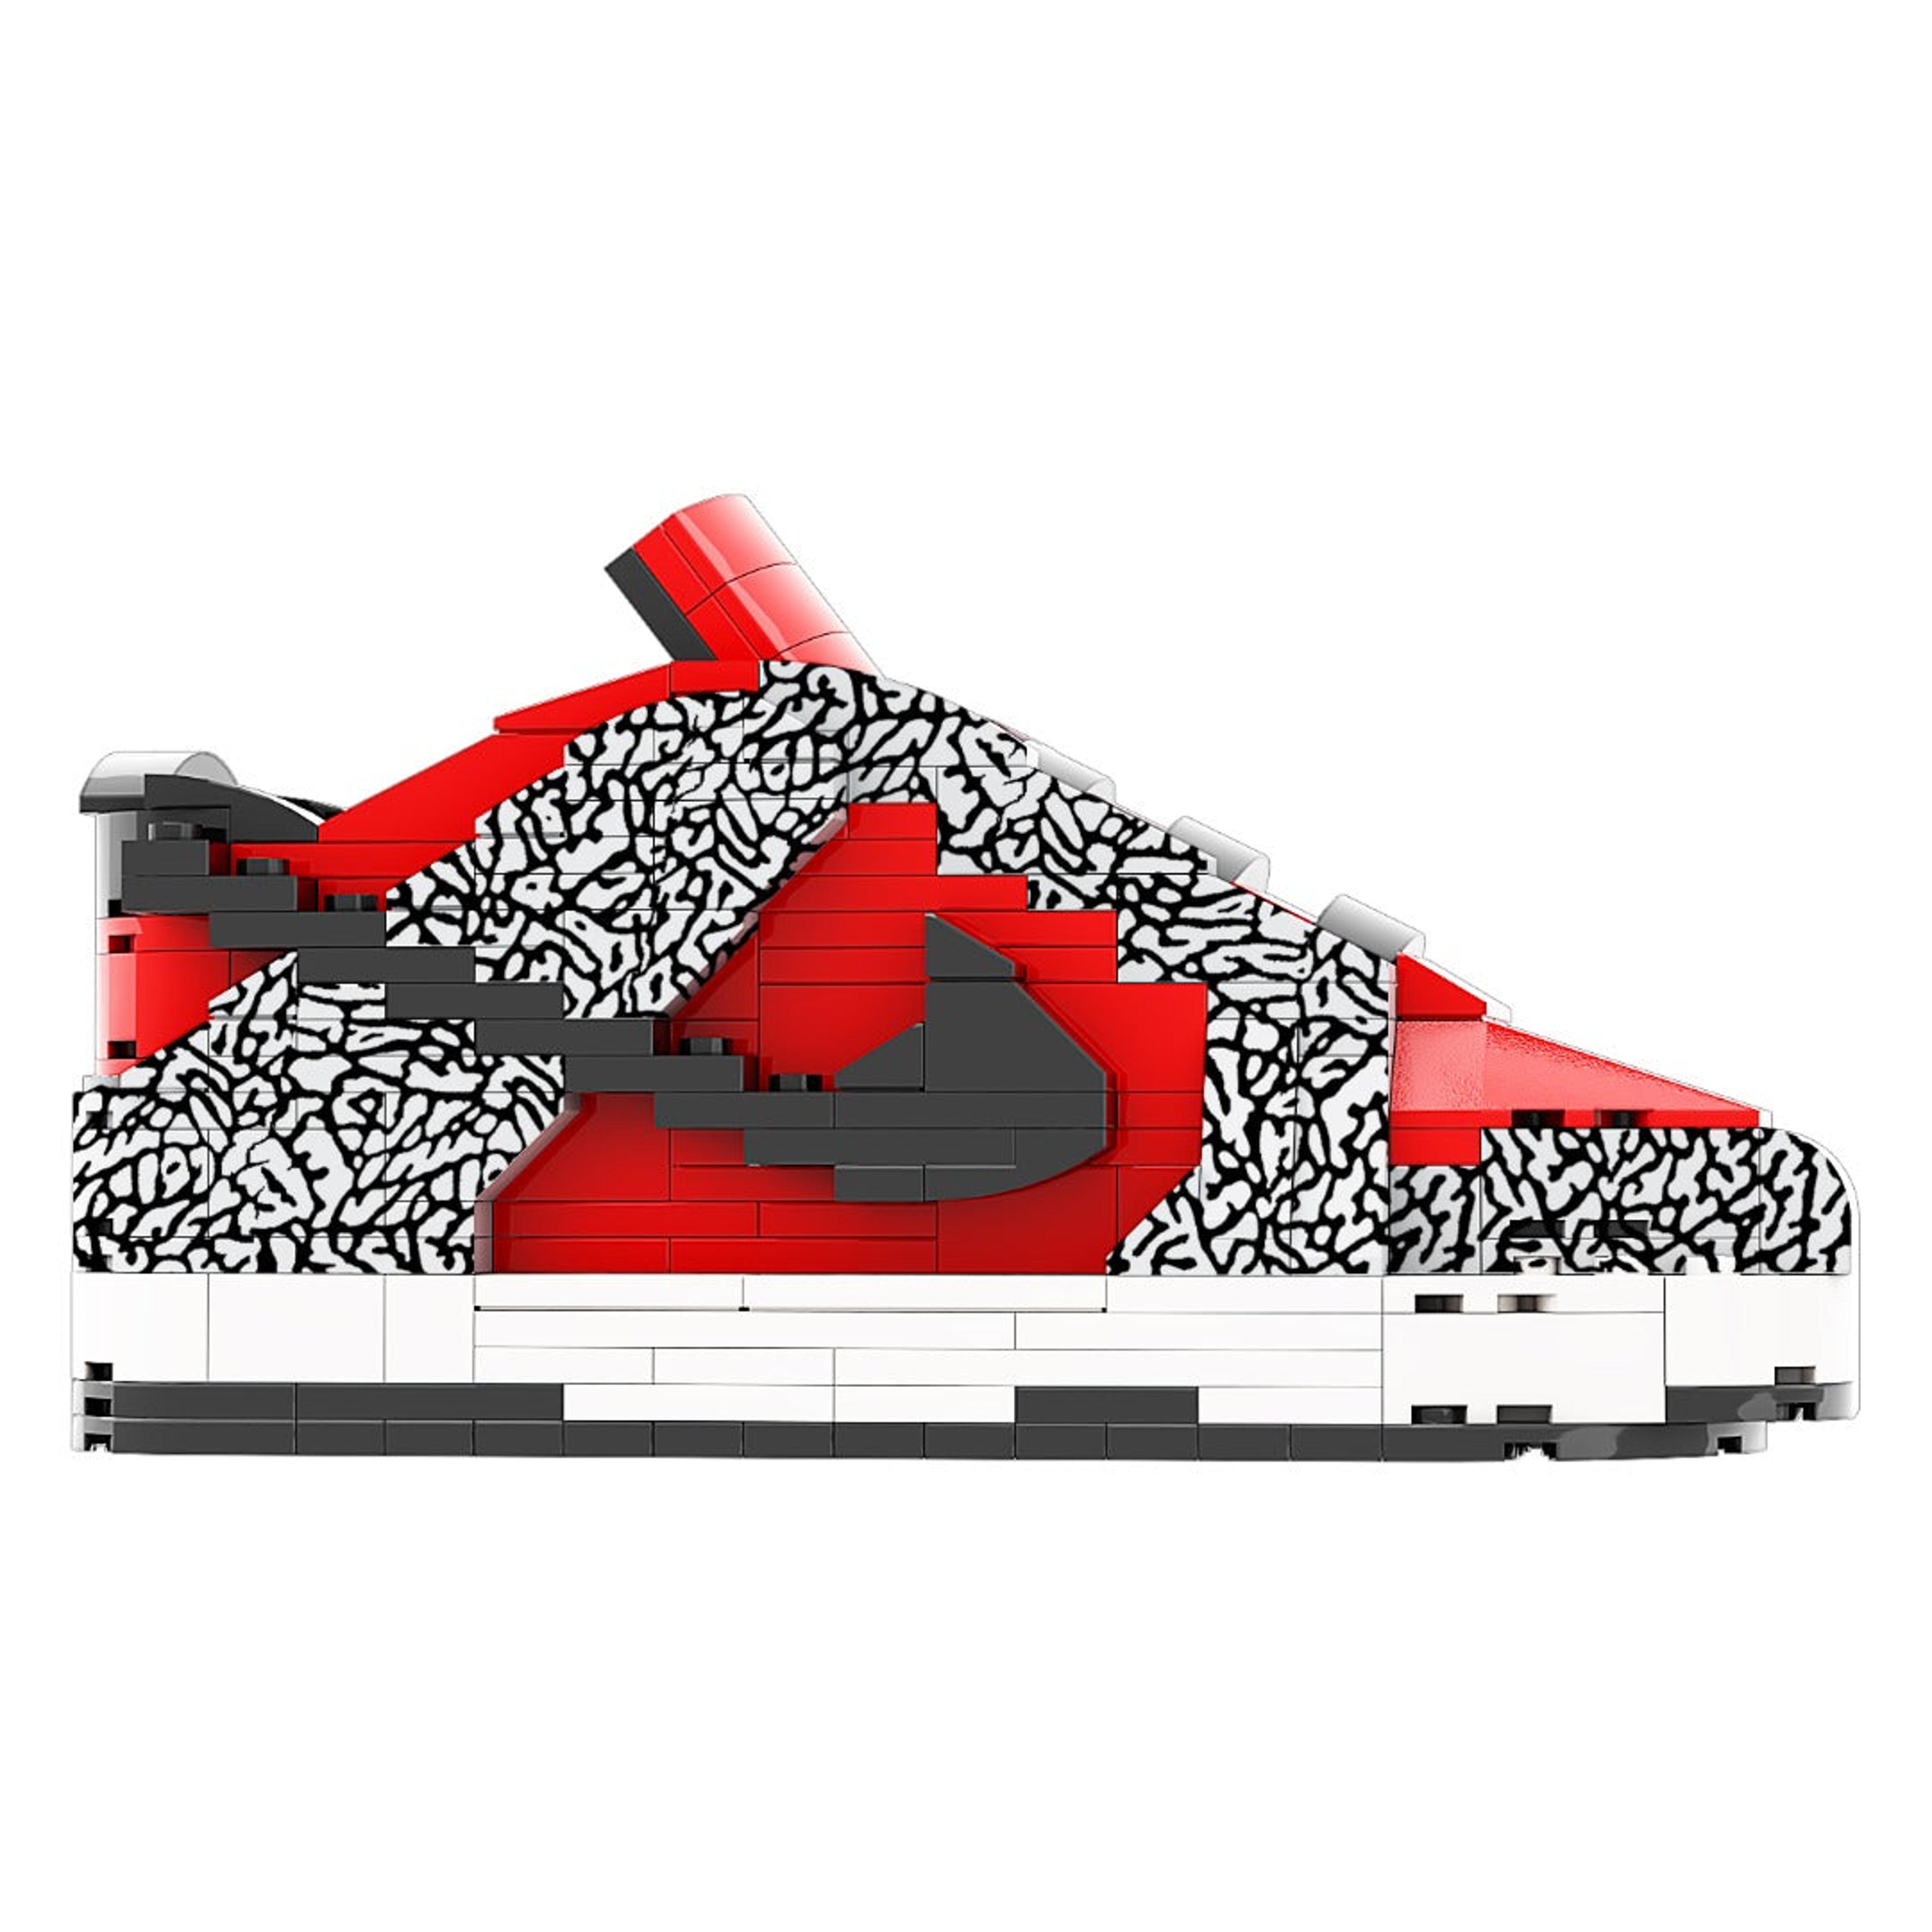 Alternate View 4 of REGULAR SB Dunk SUP "Red Cement" Sneaker Bricks with Mini Figure